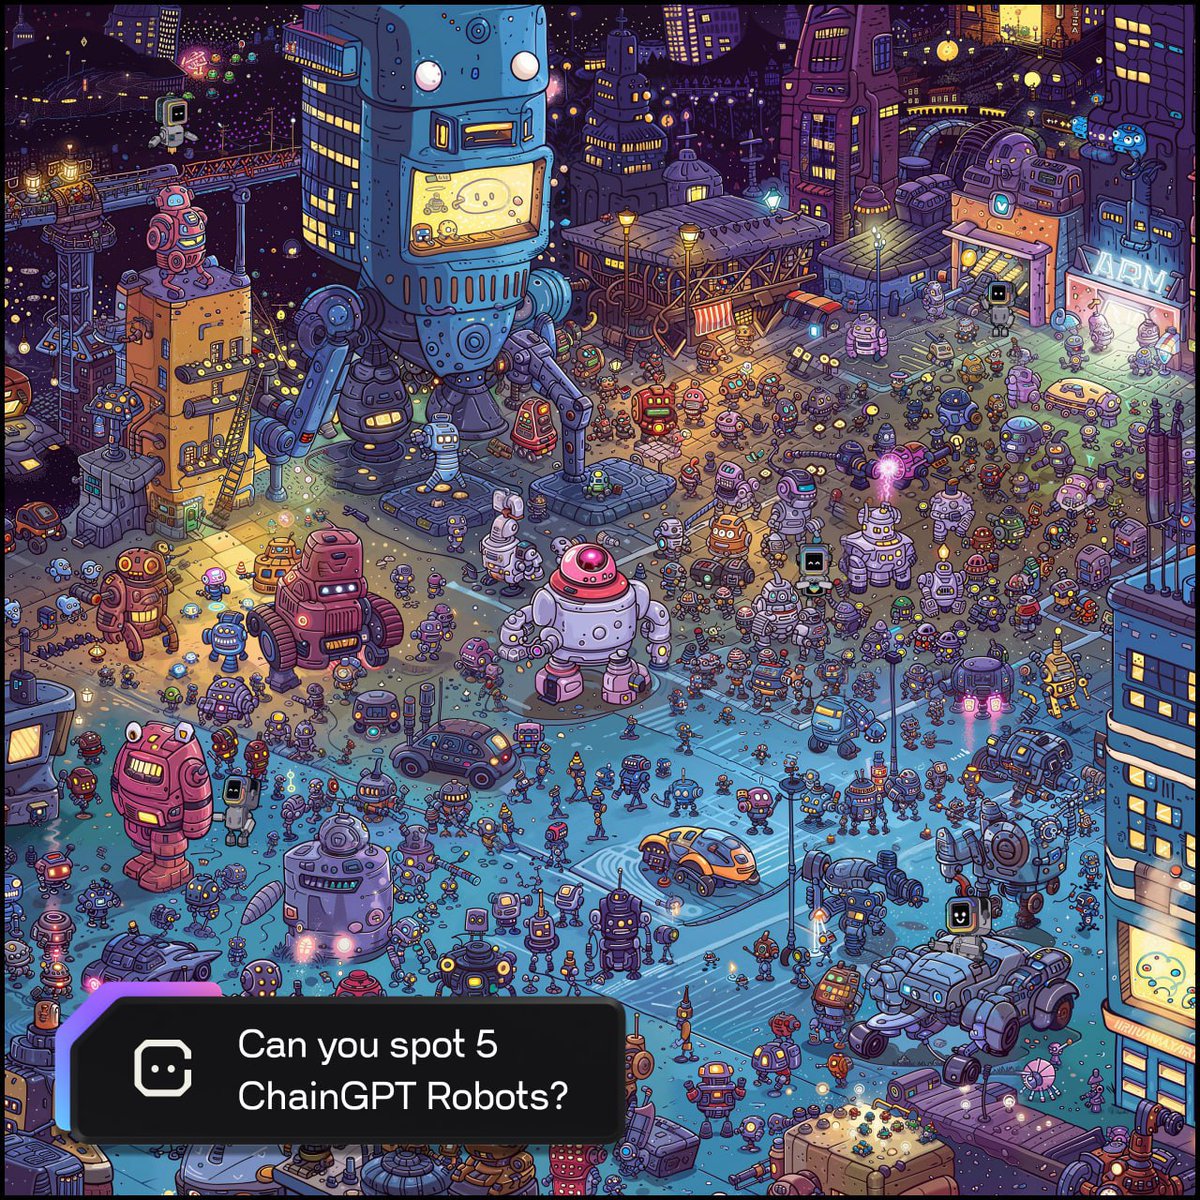 There are 5 ChainGPT robots hidden in this scene.

Can you find them all? 👀

Comment where you see them!